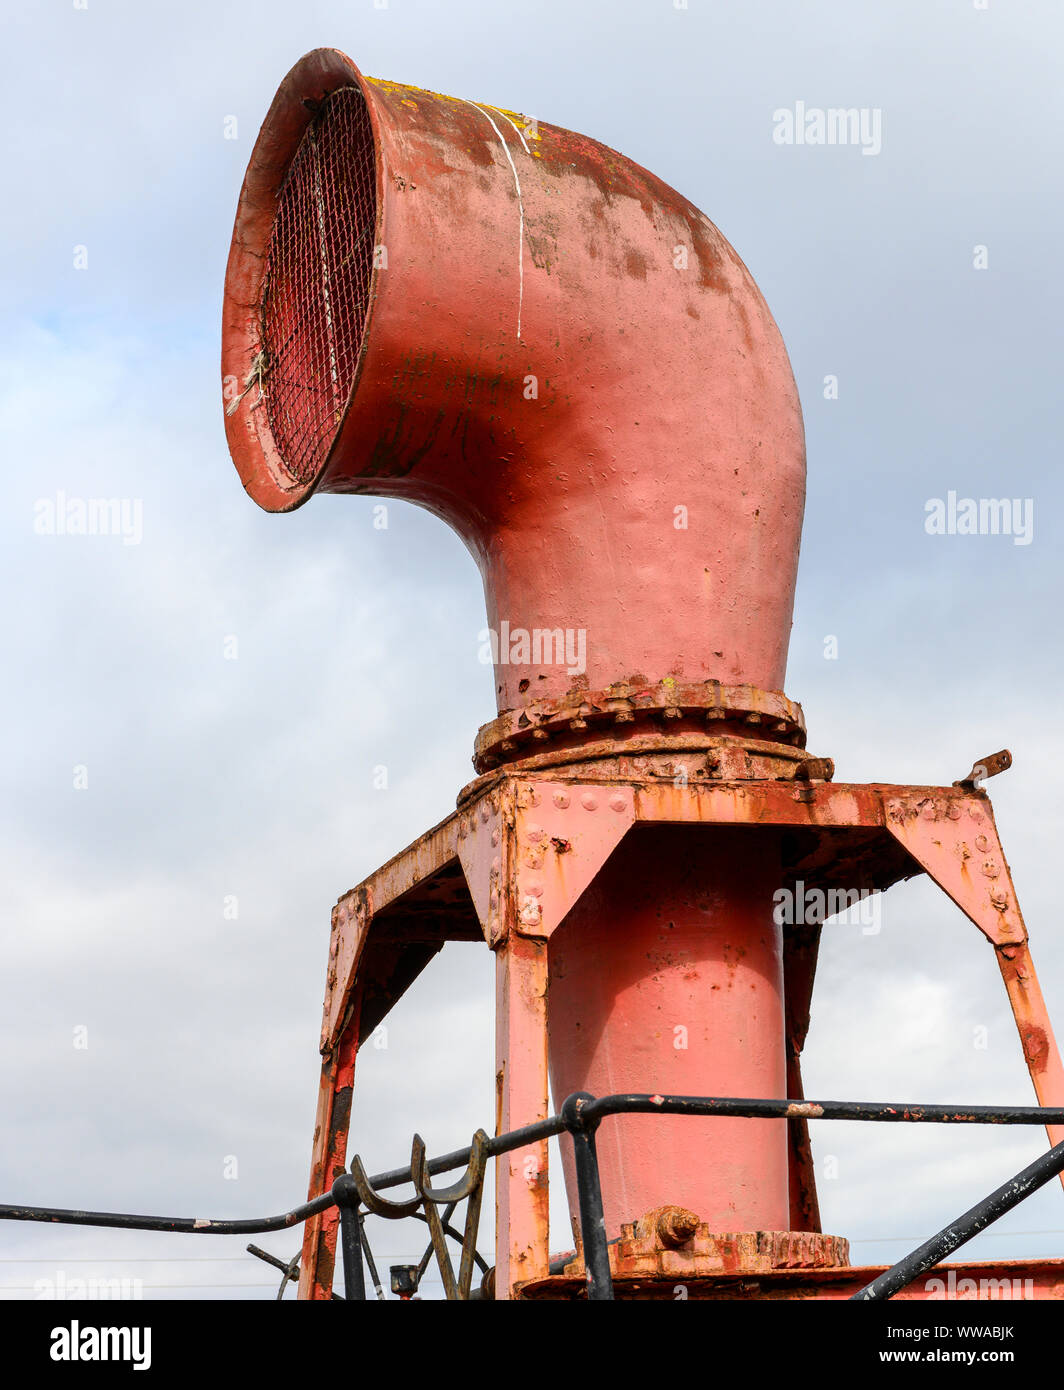 Detail of the lightship The North Carr, in service 1933 - 1975 moored at Victoria Dock, City Quay, Dundee, Tayside, Scotland, UK Stock Photo